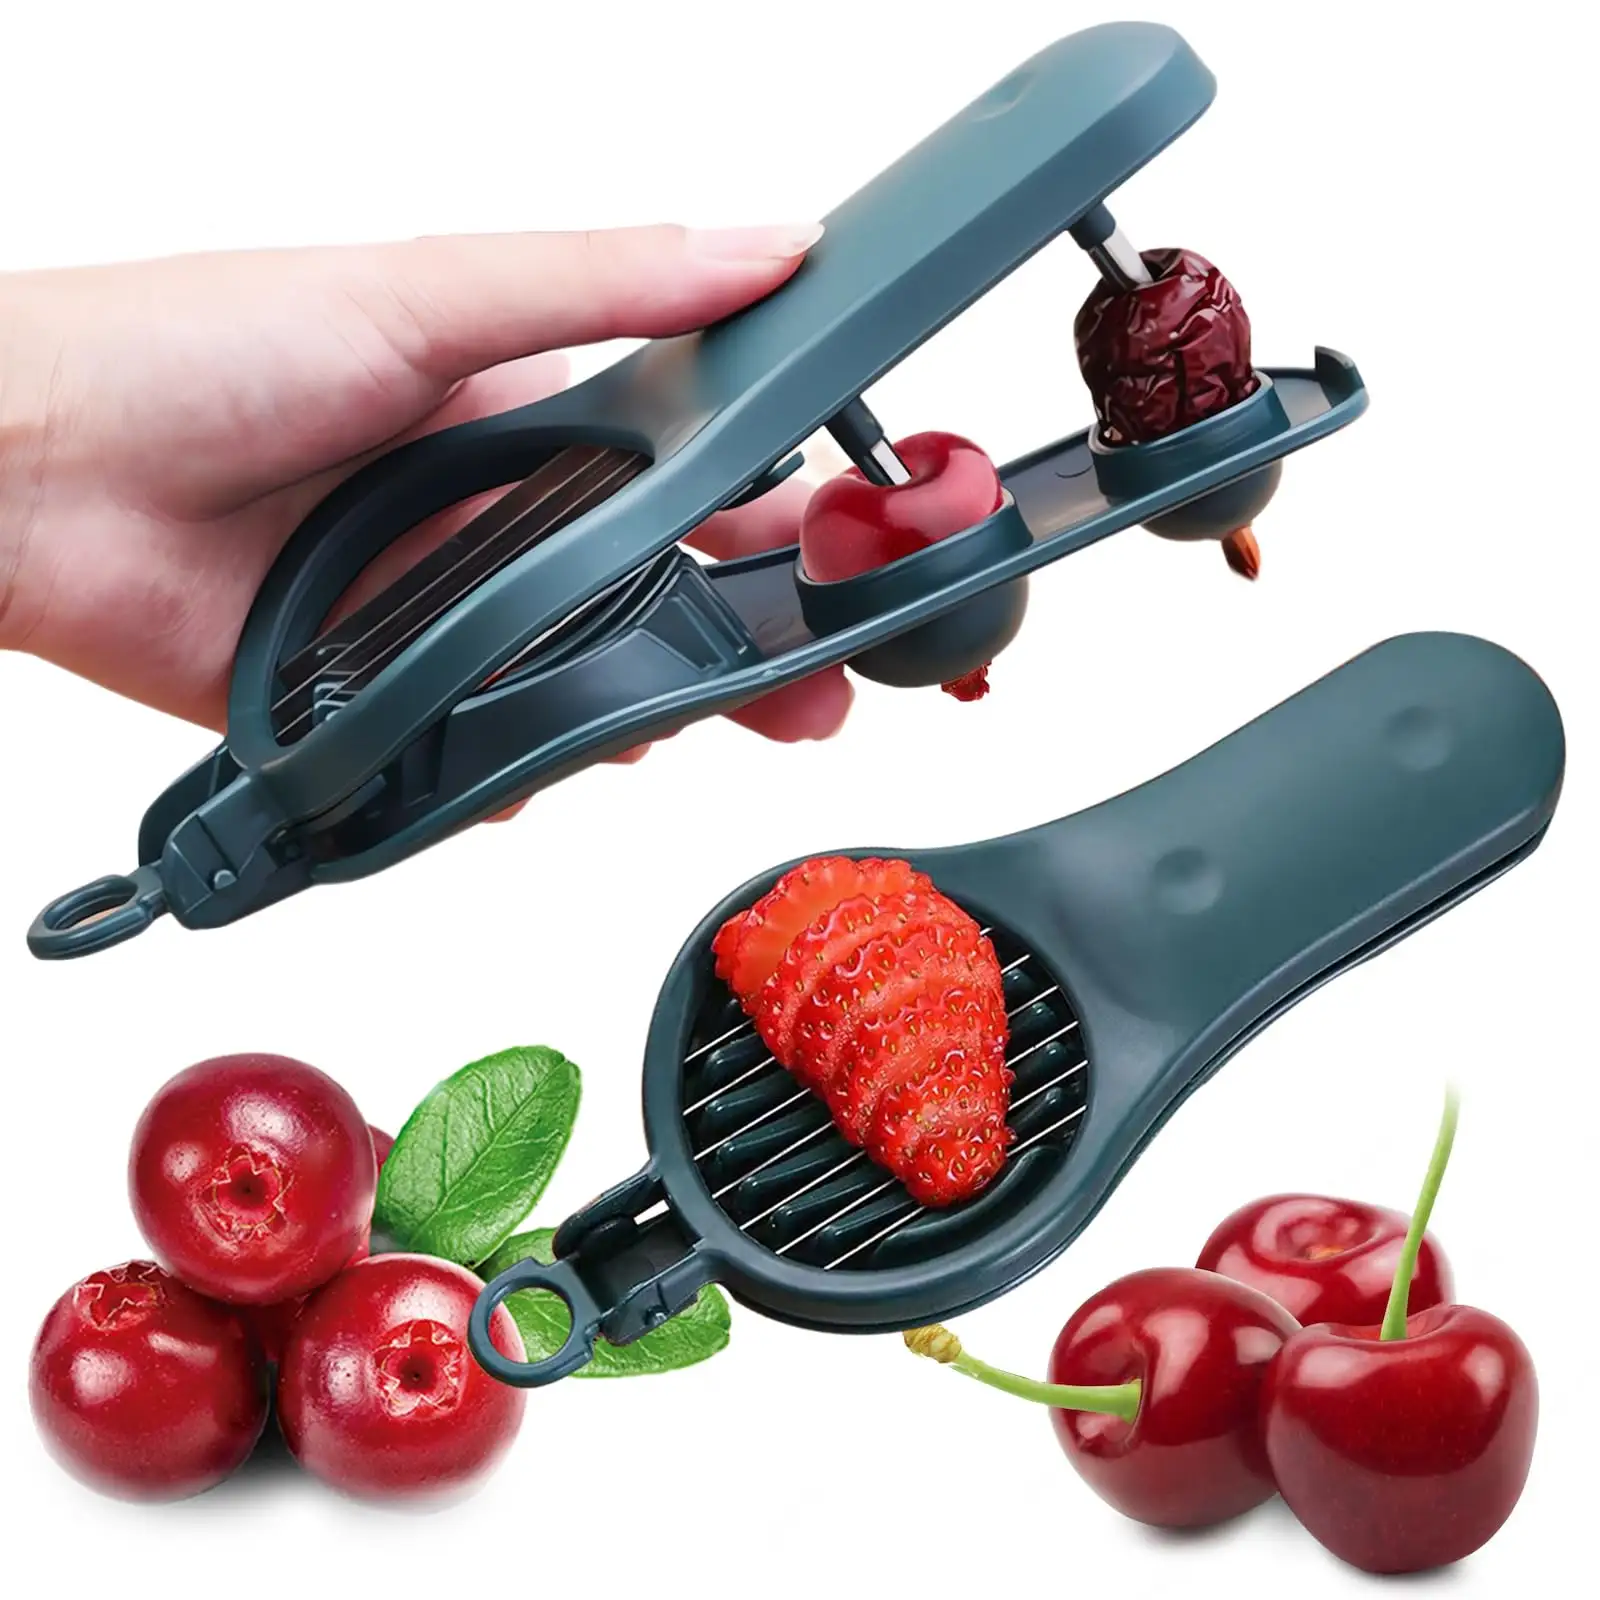 Best Sale Creative Cherry Pitter Seed Remover Fruit 2-in-1 Cherry Pitter Slicer